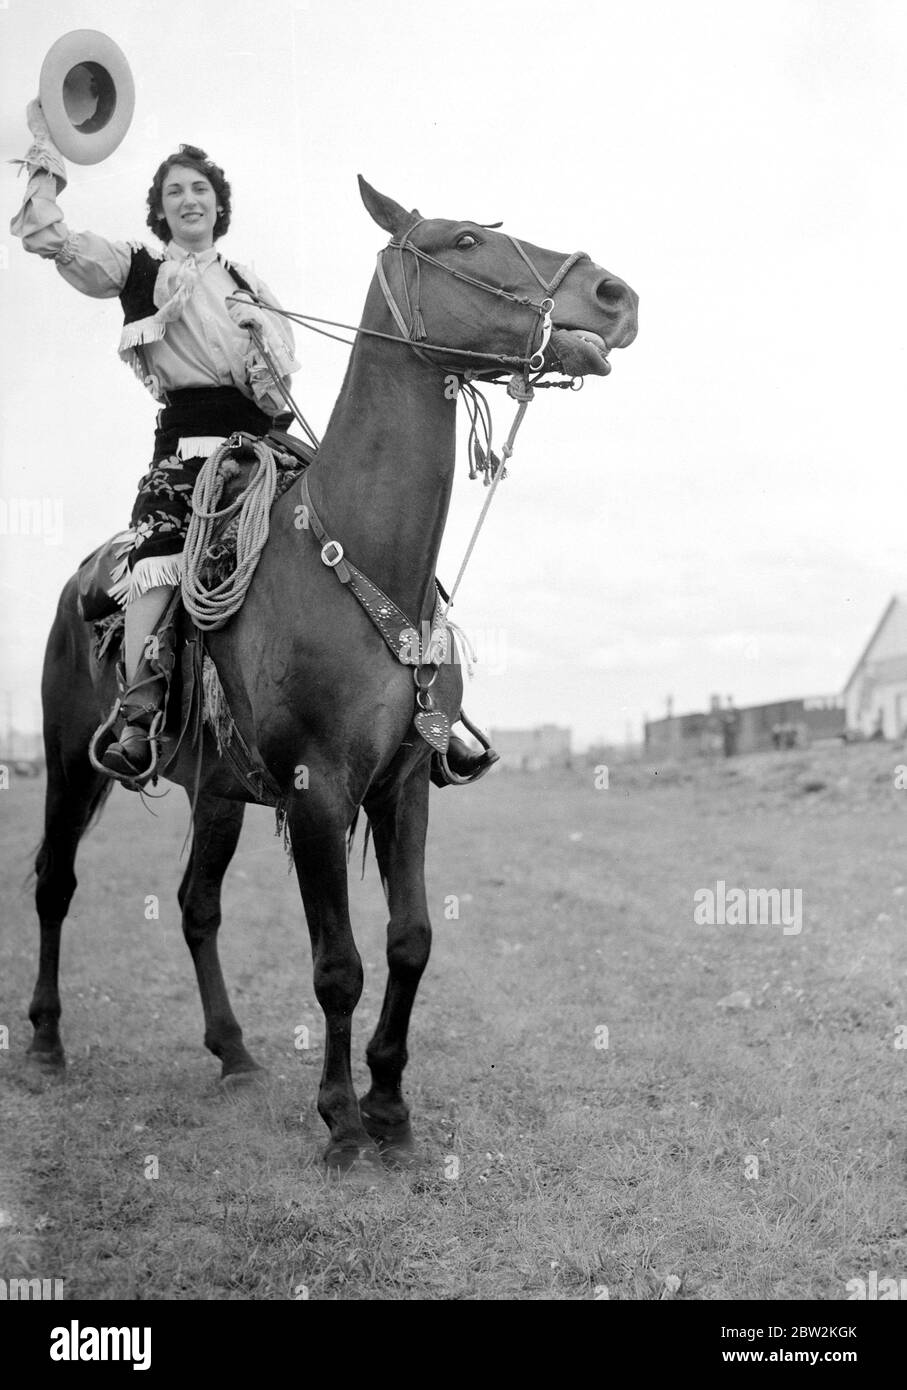 The Royal tour of Canada and the USA by King George VI and Queen Elizabeth , 1939 Marge Allen , a typical Western cowgirl shouts  Yippee  for the King and Queen during their journey through the Prairie lands of Canada. Stock Photo